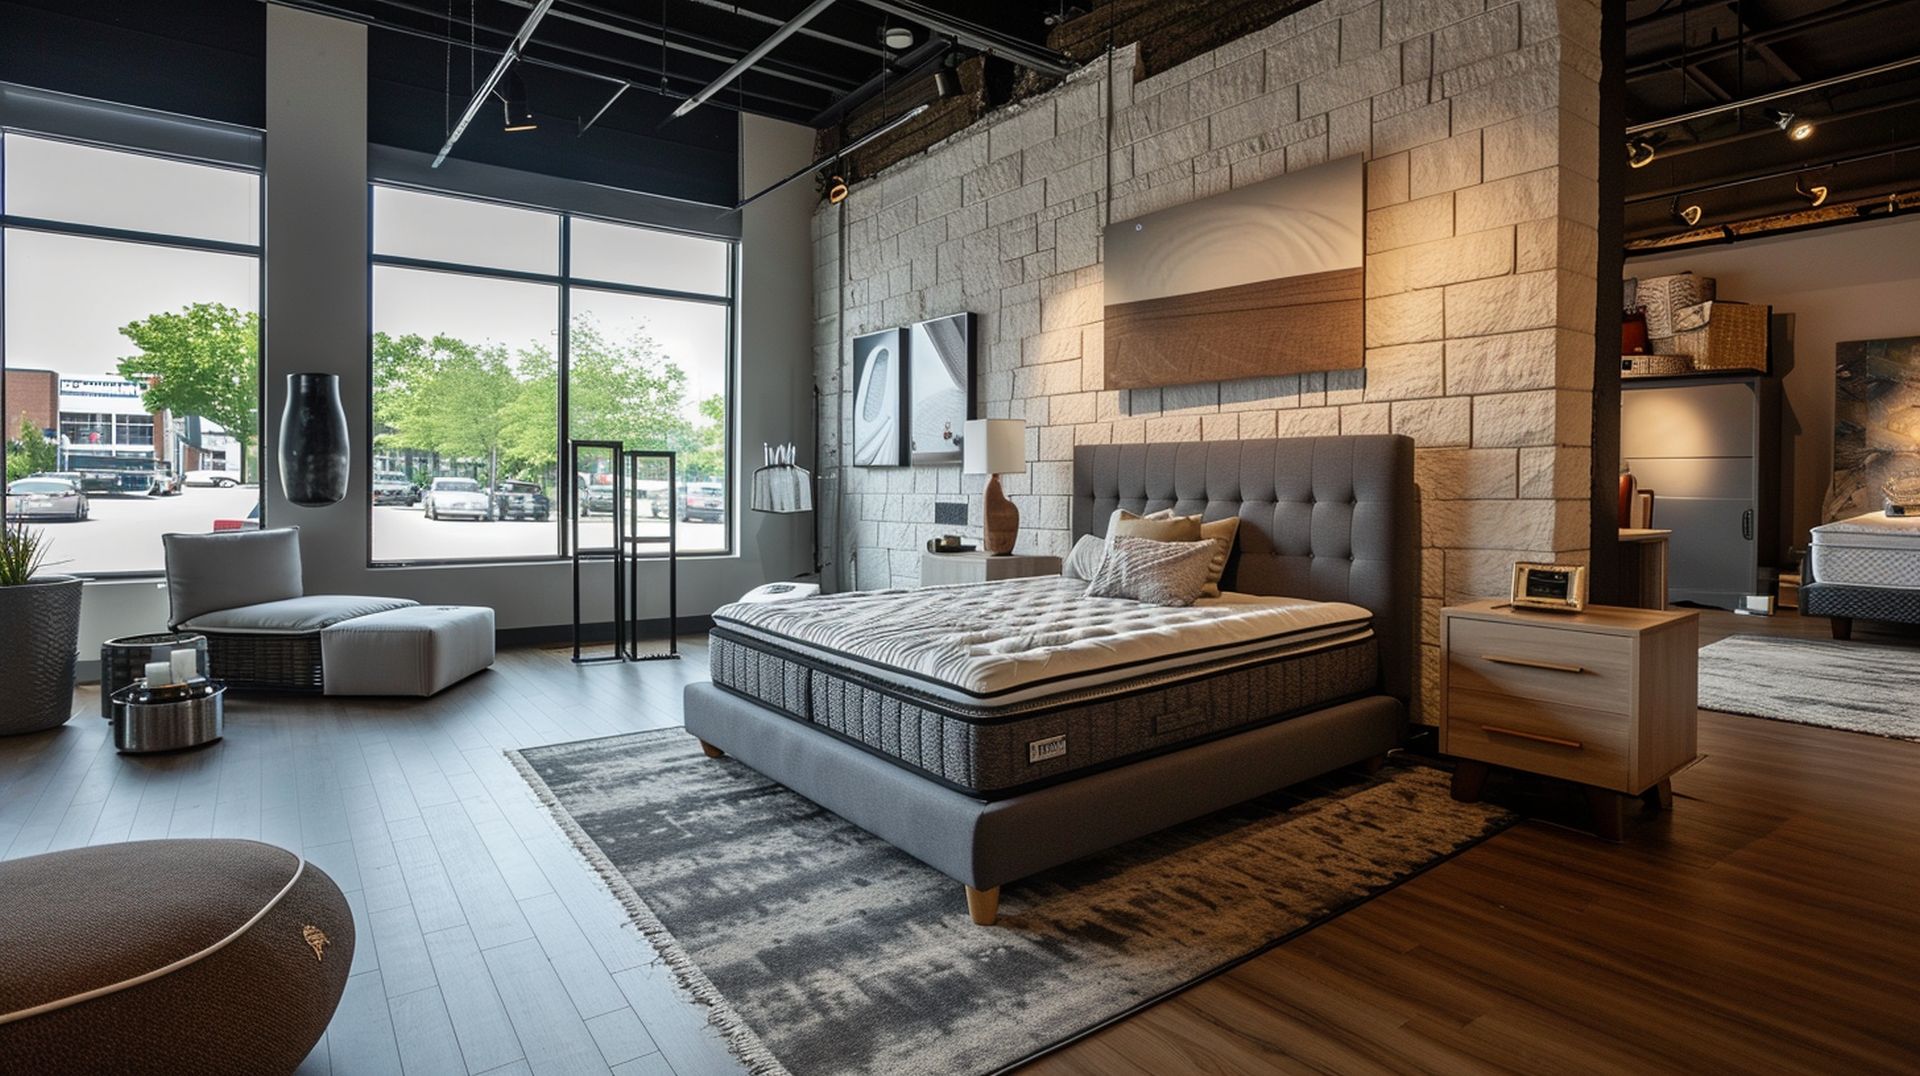 If you're looking for a new bed, mattress stores in Aliso Viejo offer the best customer and delivery service, financing, and warranties in California